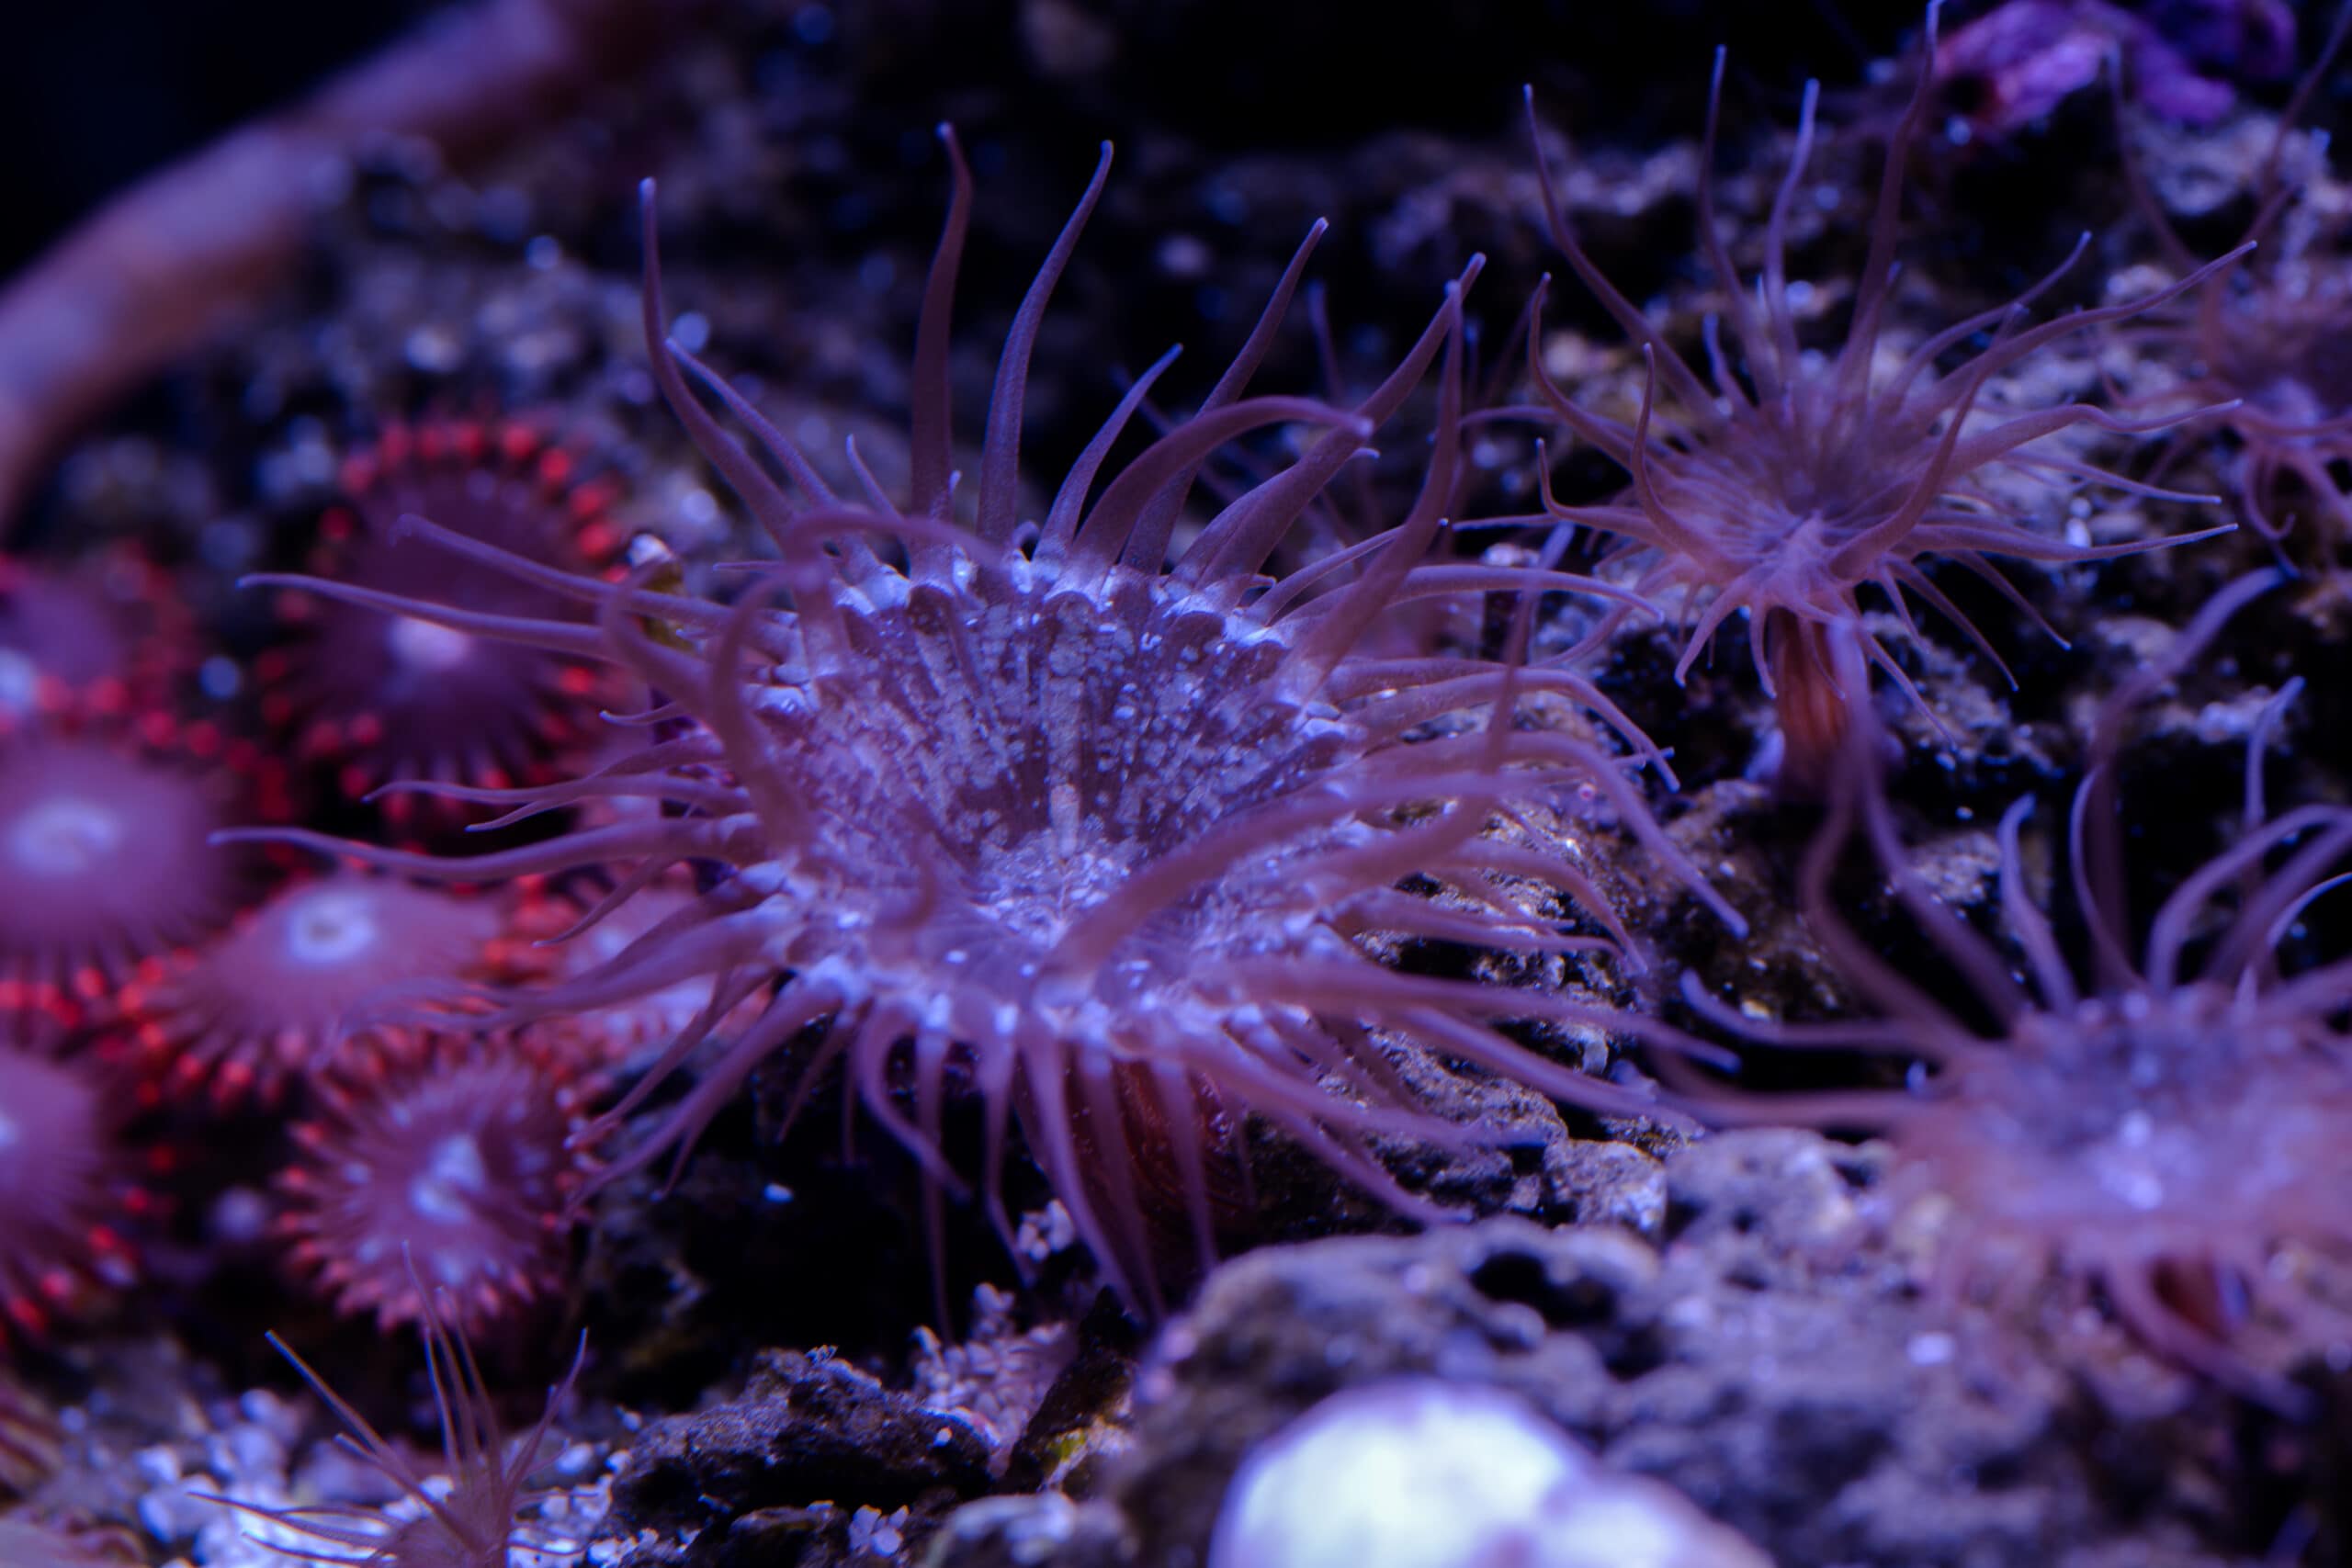 Aiptasia Anemones can be a horrible pest